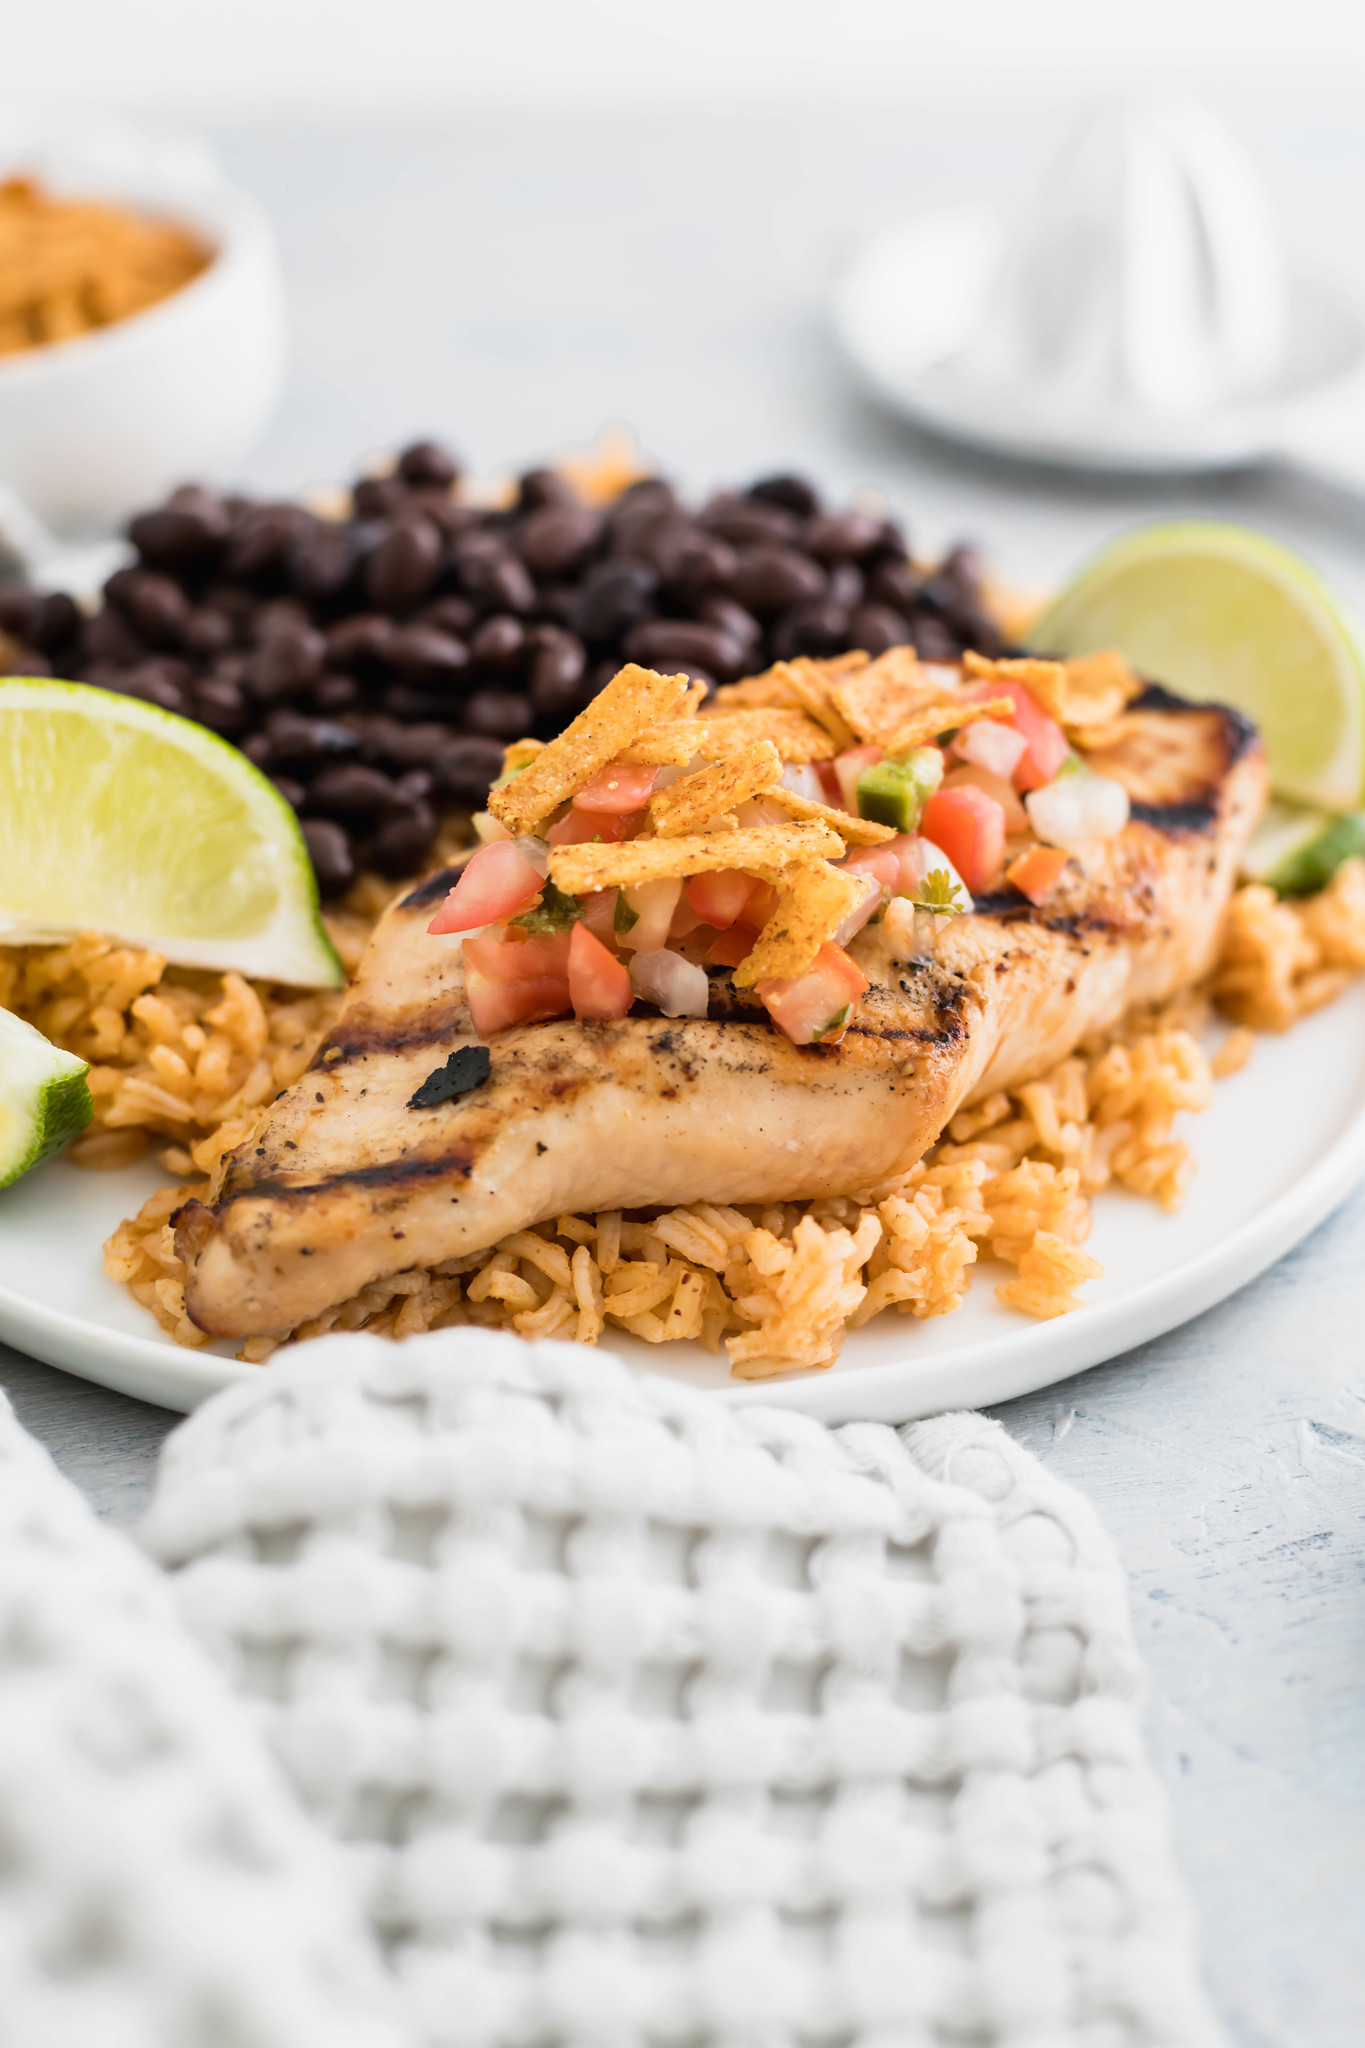 Chili's margarita chicken on a bed of Mexican rice with beans on the side.